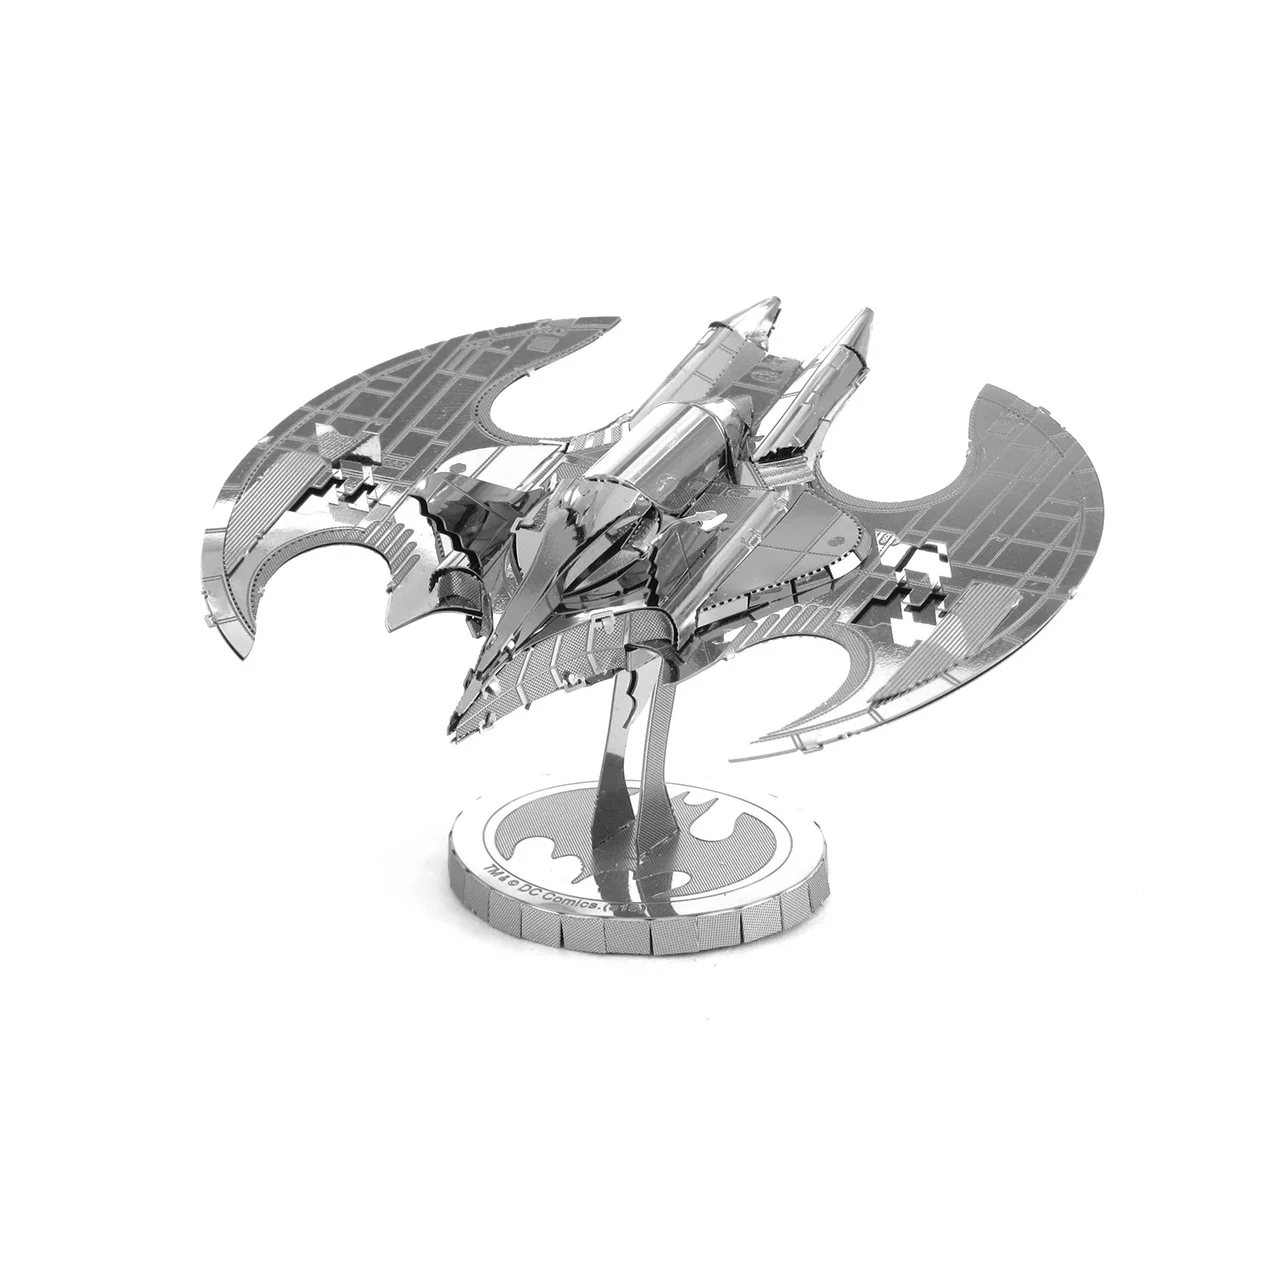 

BAT 3D Puzzle DIY metal mini model kits Collection Toys Gifts earth Laser Cutting Jigsaw precision measurement forging new